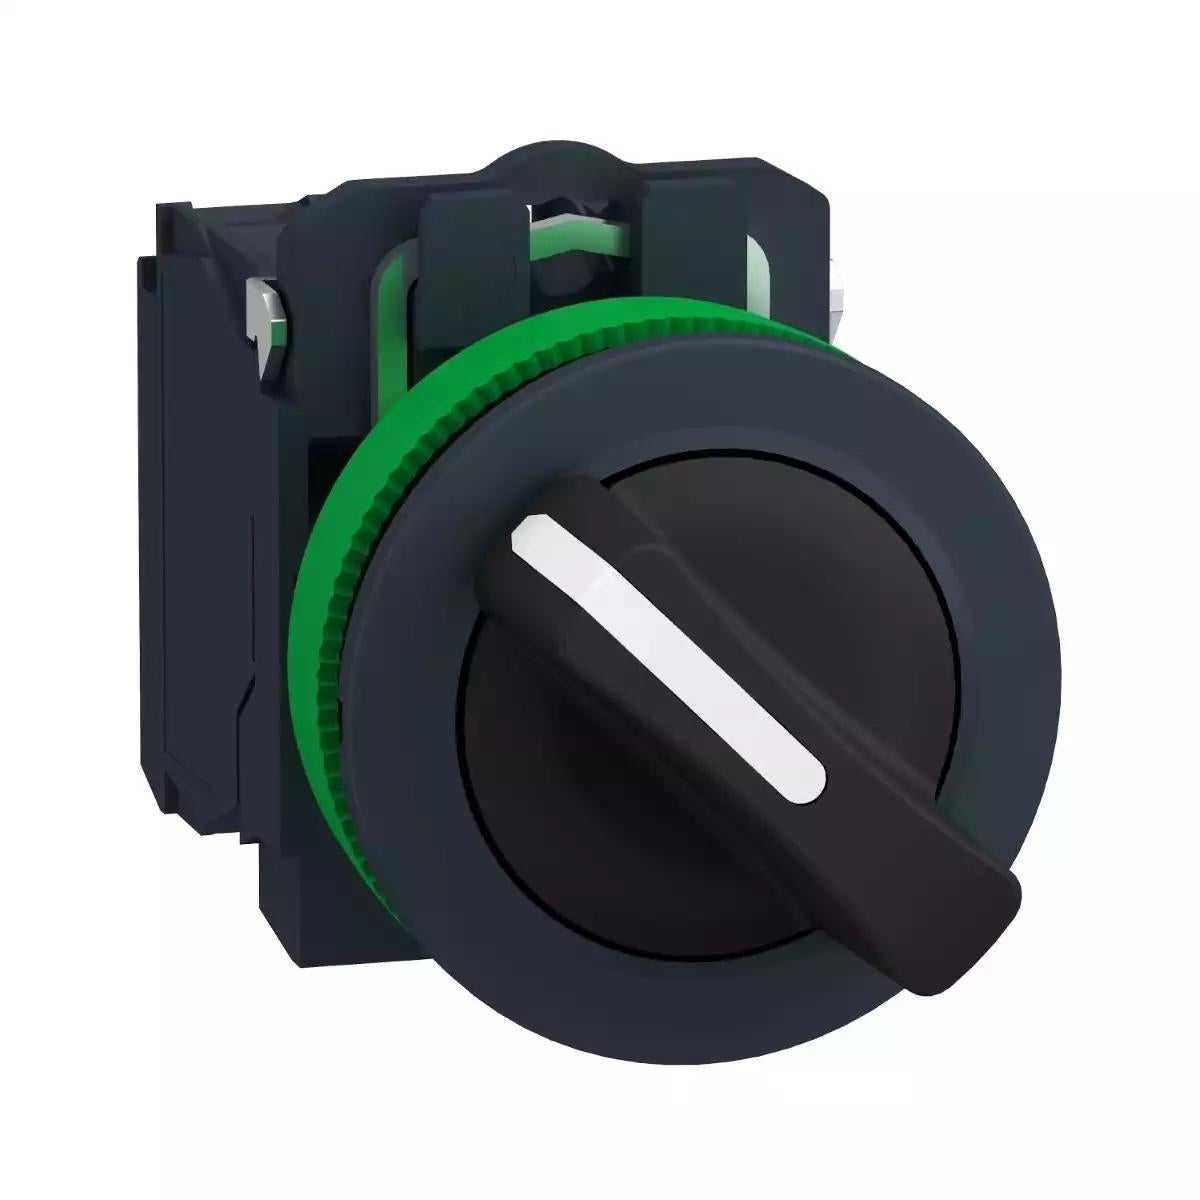 Schneider Electric Harmony XB5 Selector switch flush mounted, plastic, black, Ã˜30, 2 positions, stay put, 1 NO + 1 NC